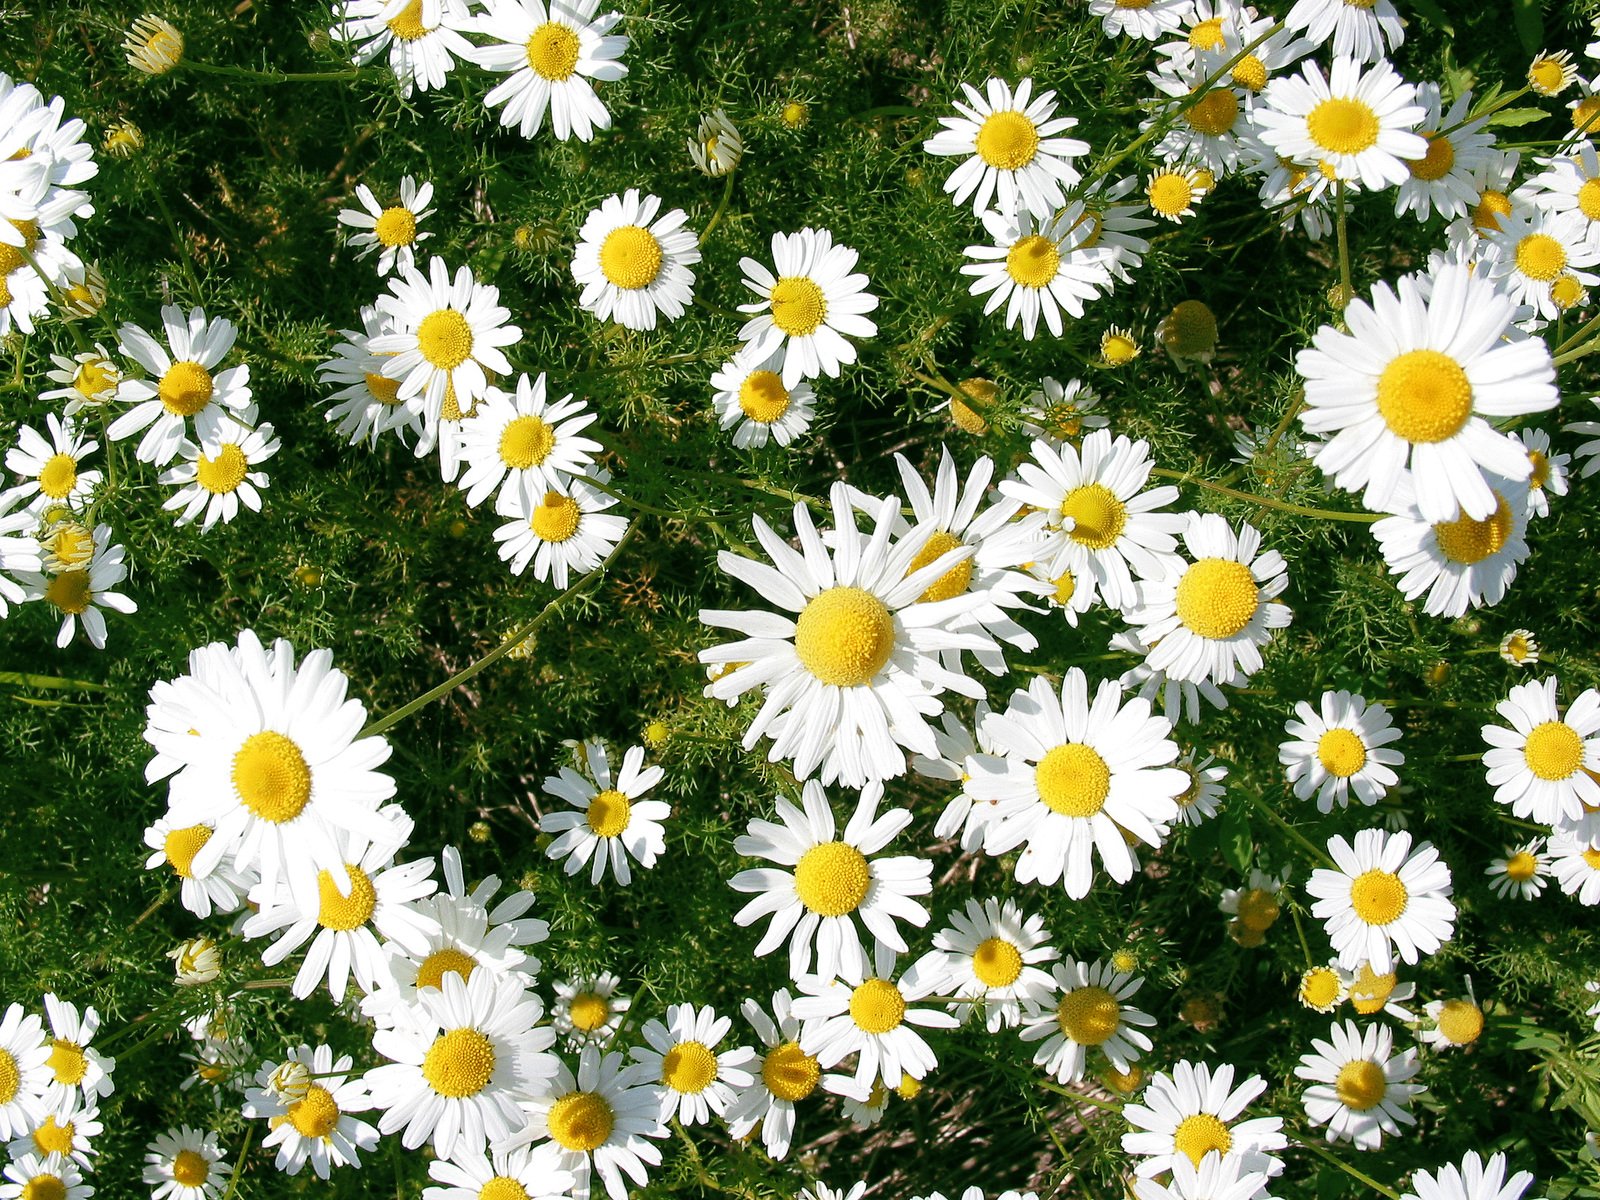 a field full of white and yellow flowers